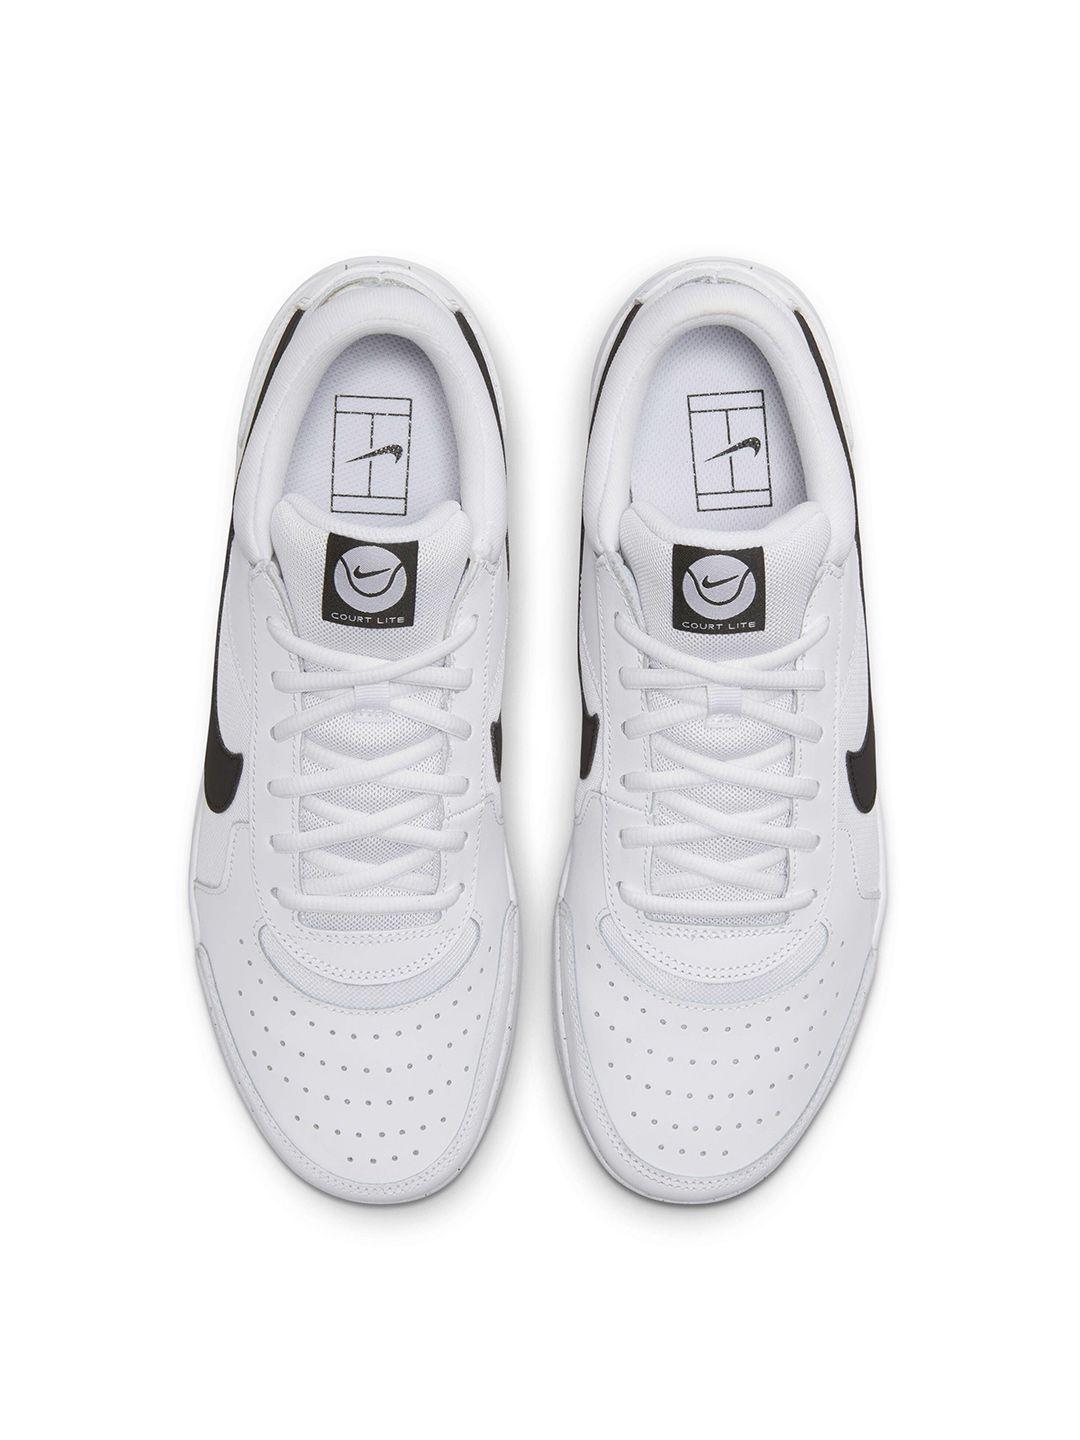 nike-laced-up-tennis-sports-shoes